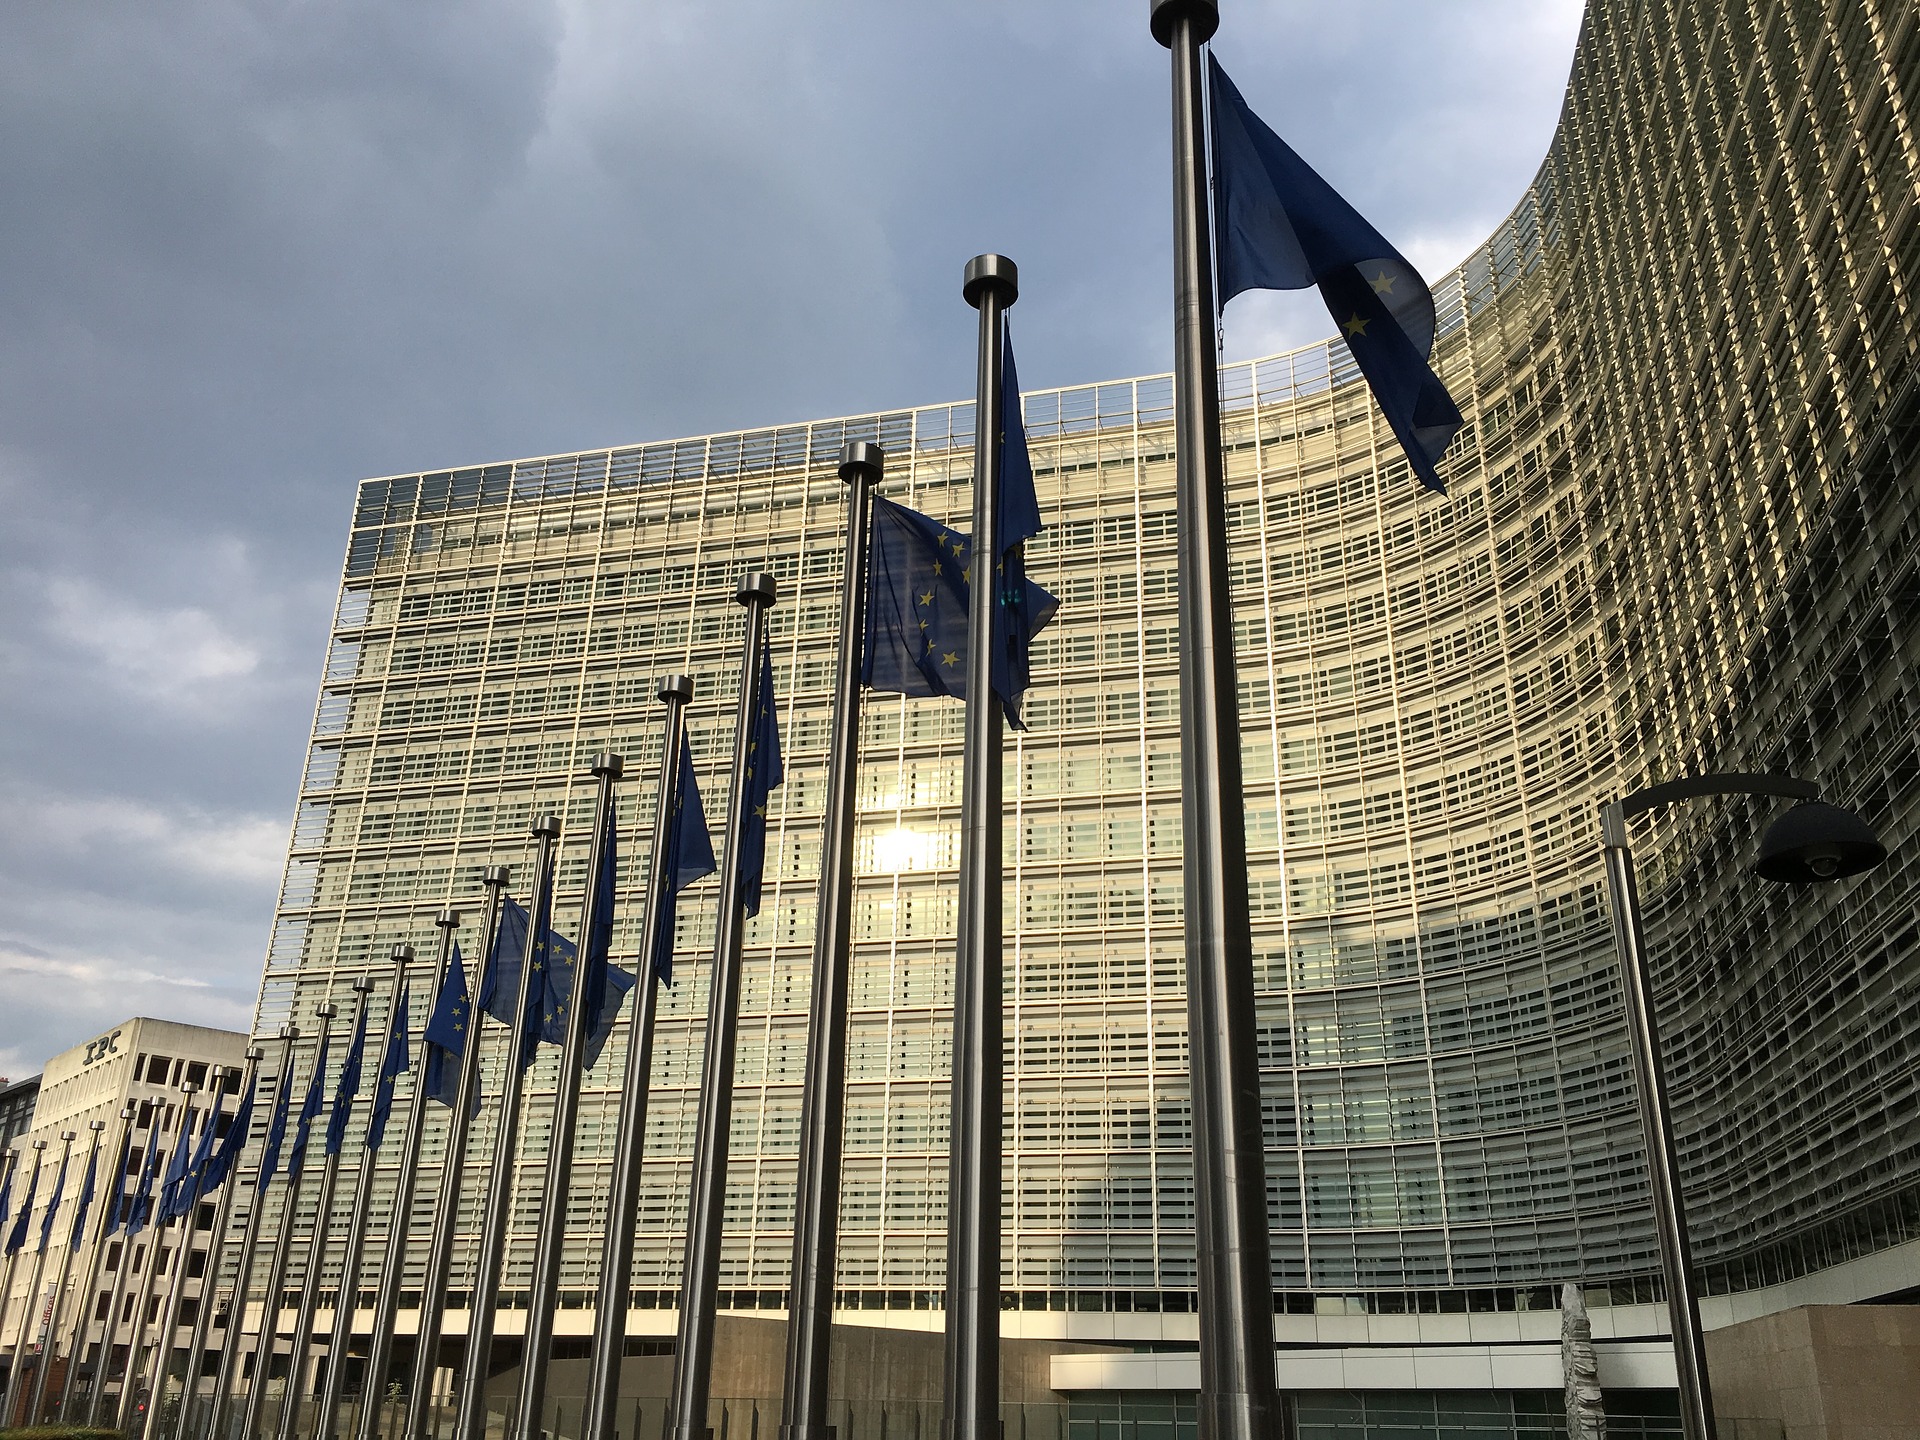 EC Launches Infringement Procedure Against Hungary for Flouting CJEU Ruling on NGOs